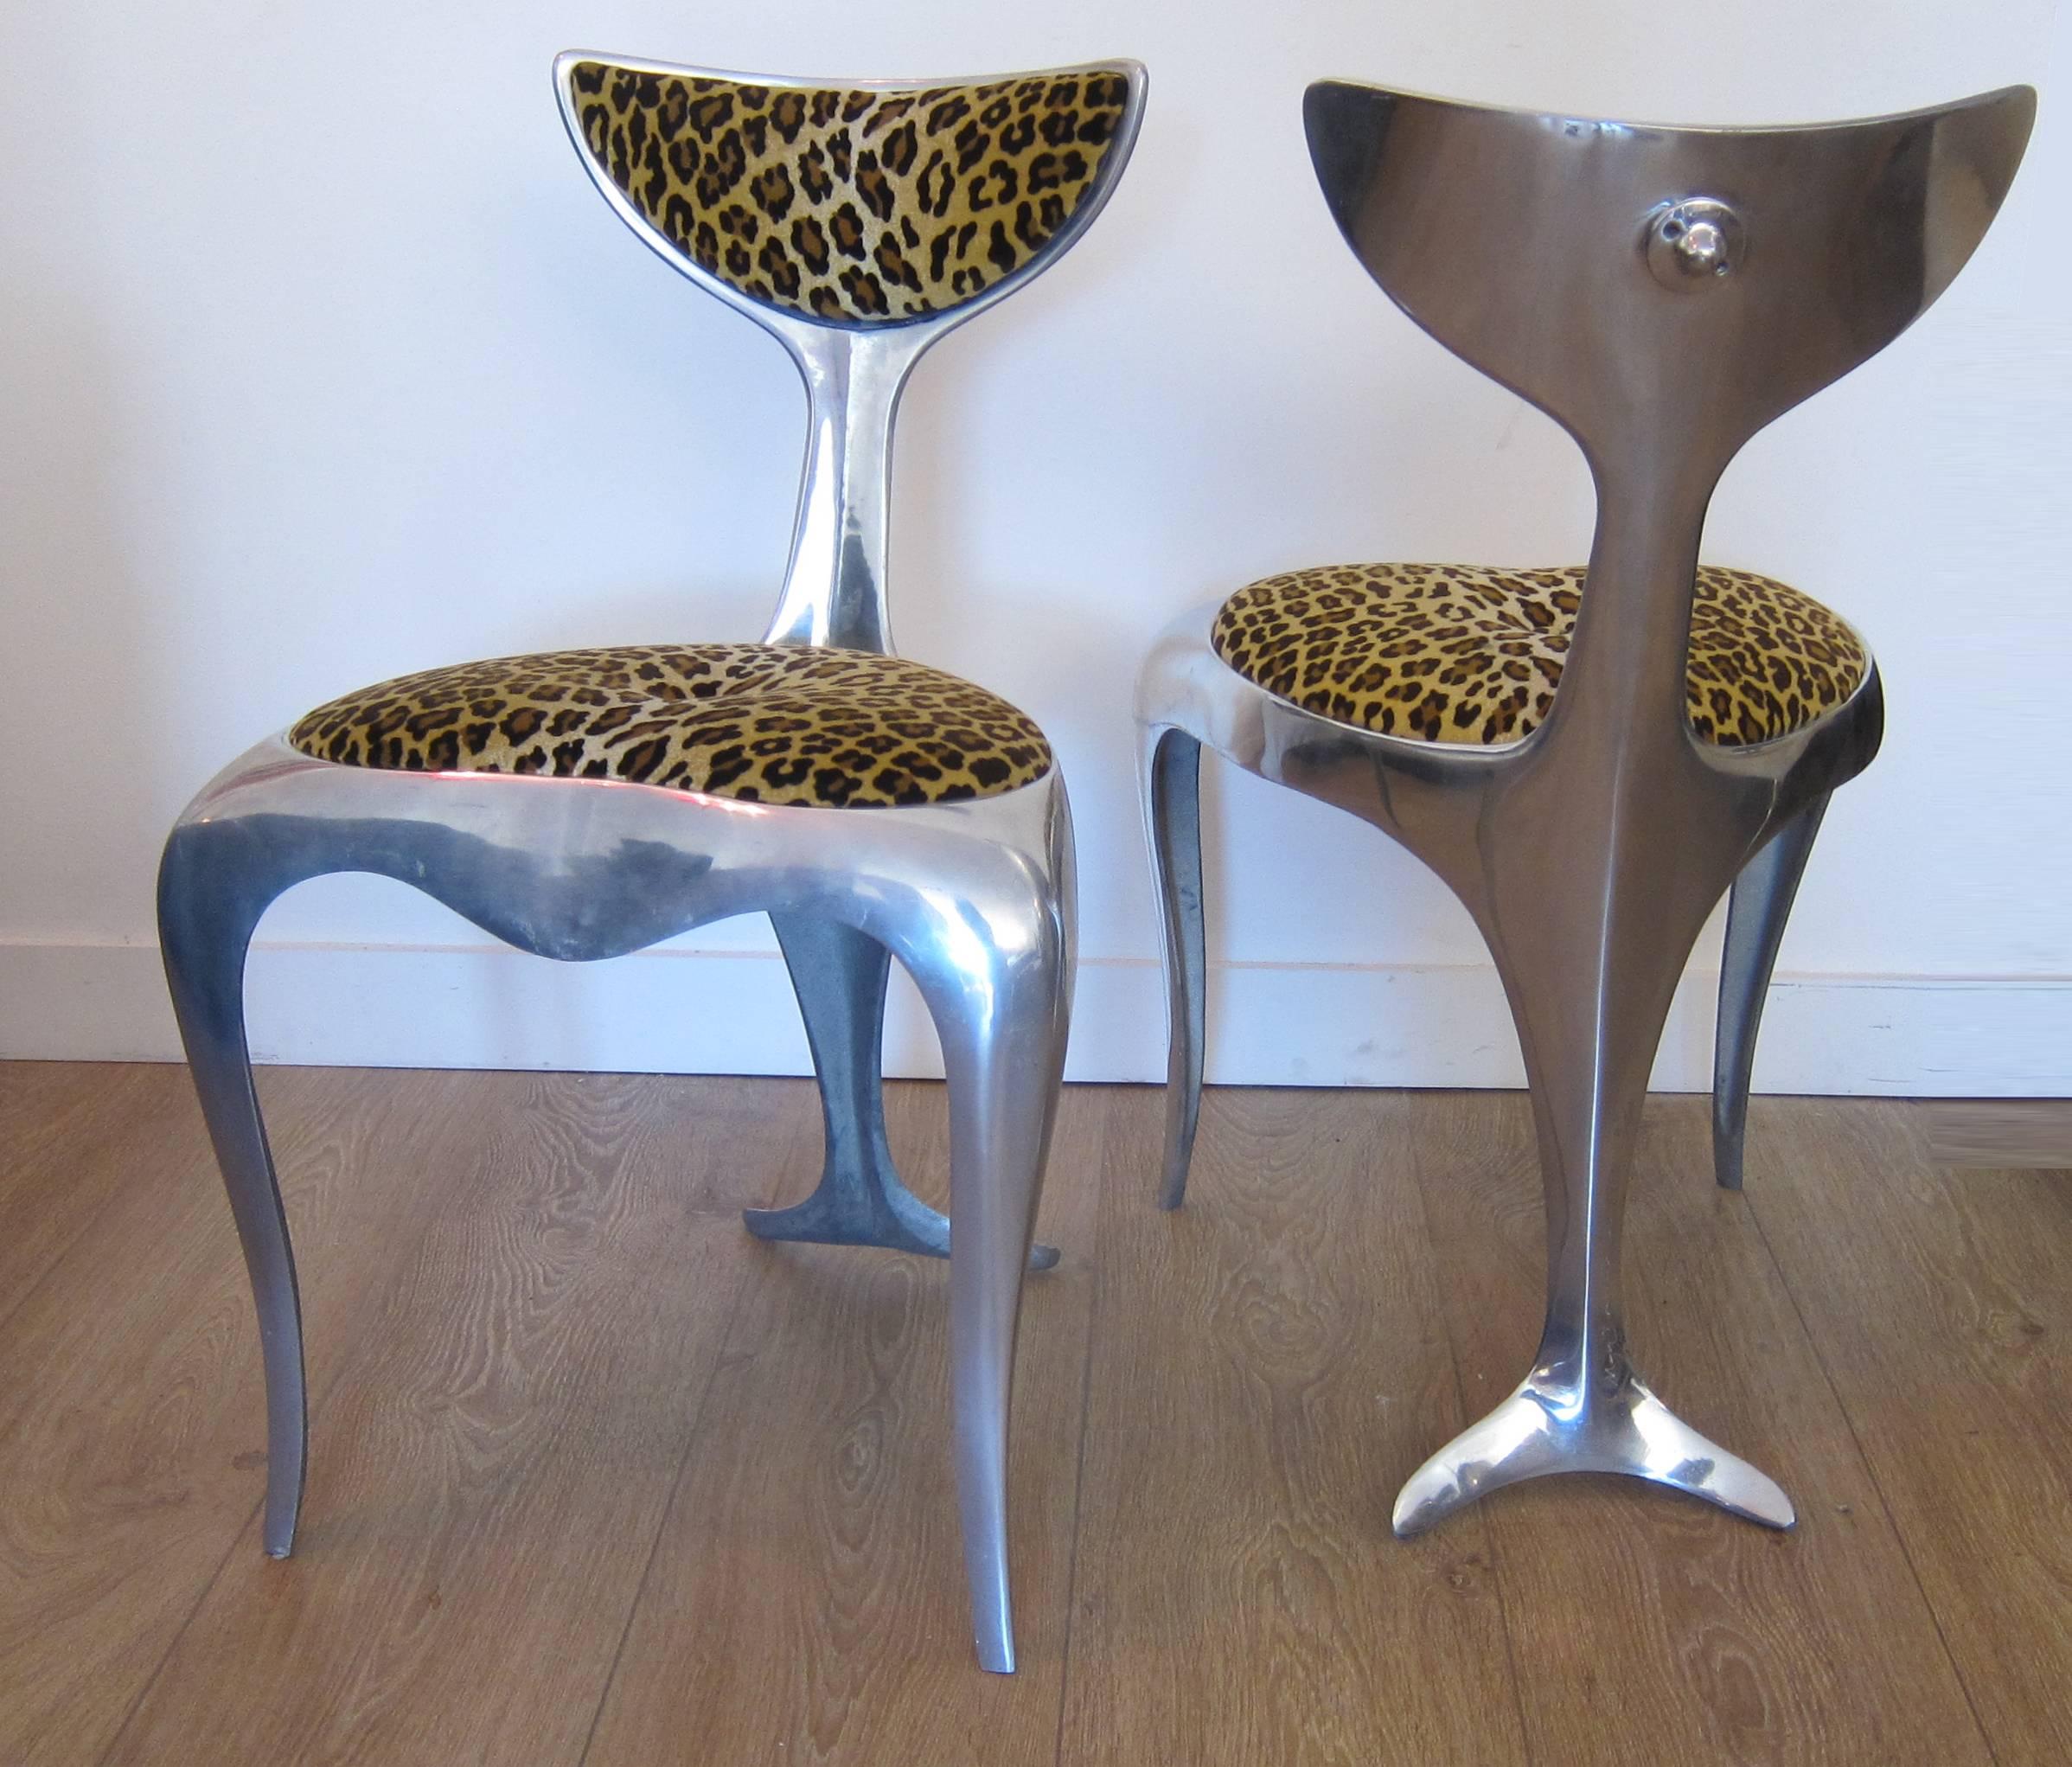 Pair of polished aluminum dolphin tail chairs by Mark Brazier-Jones.
Signed and numbered 41/300 and 44/300, 1994.